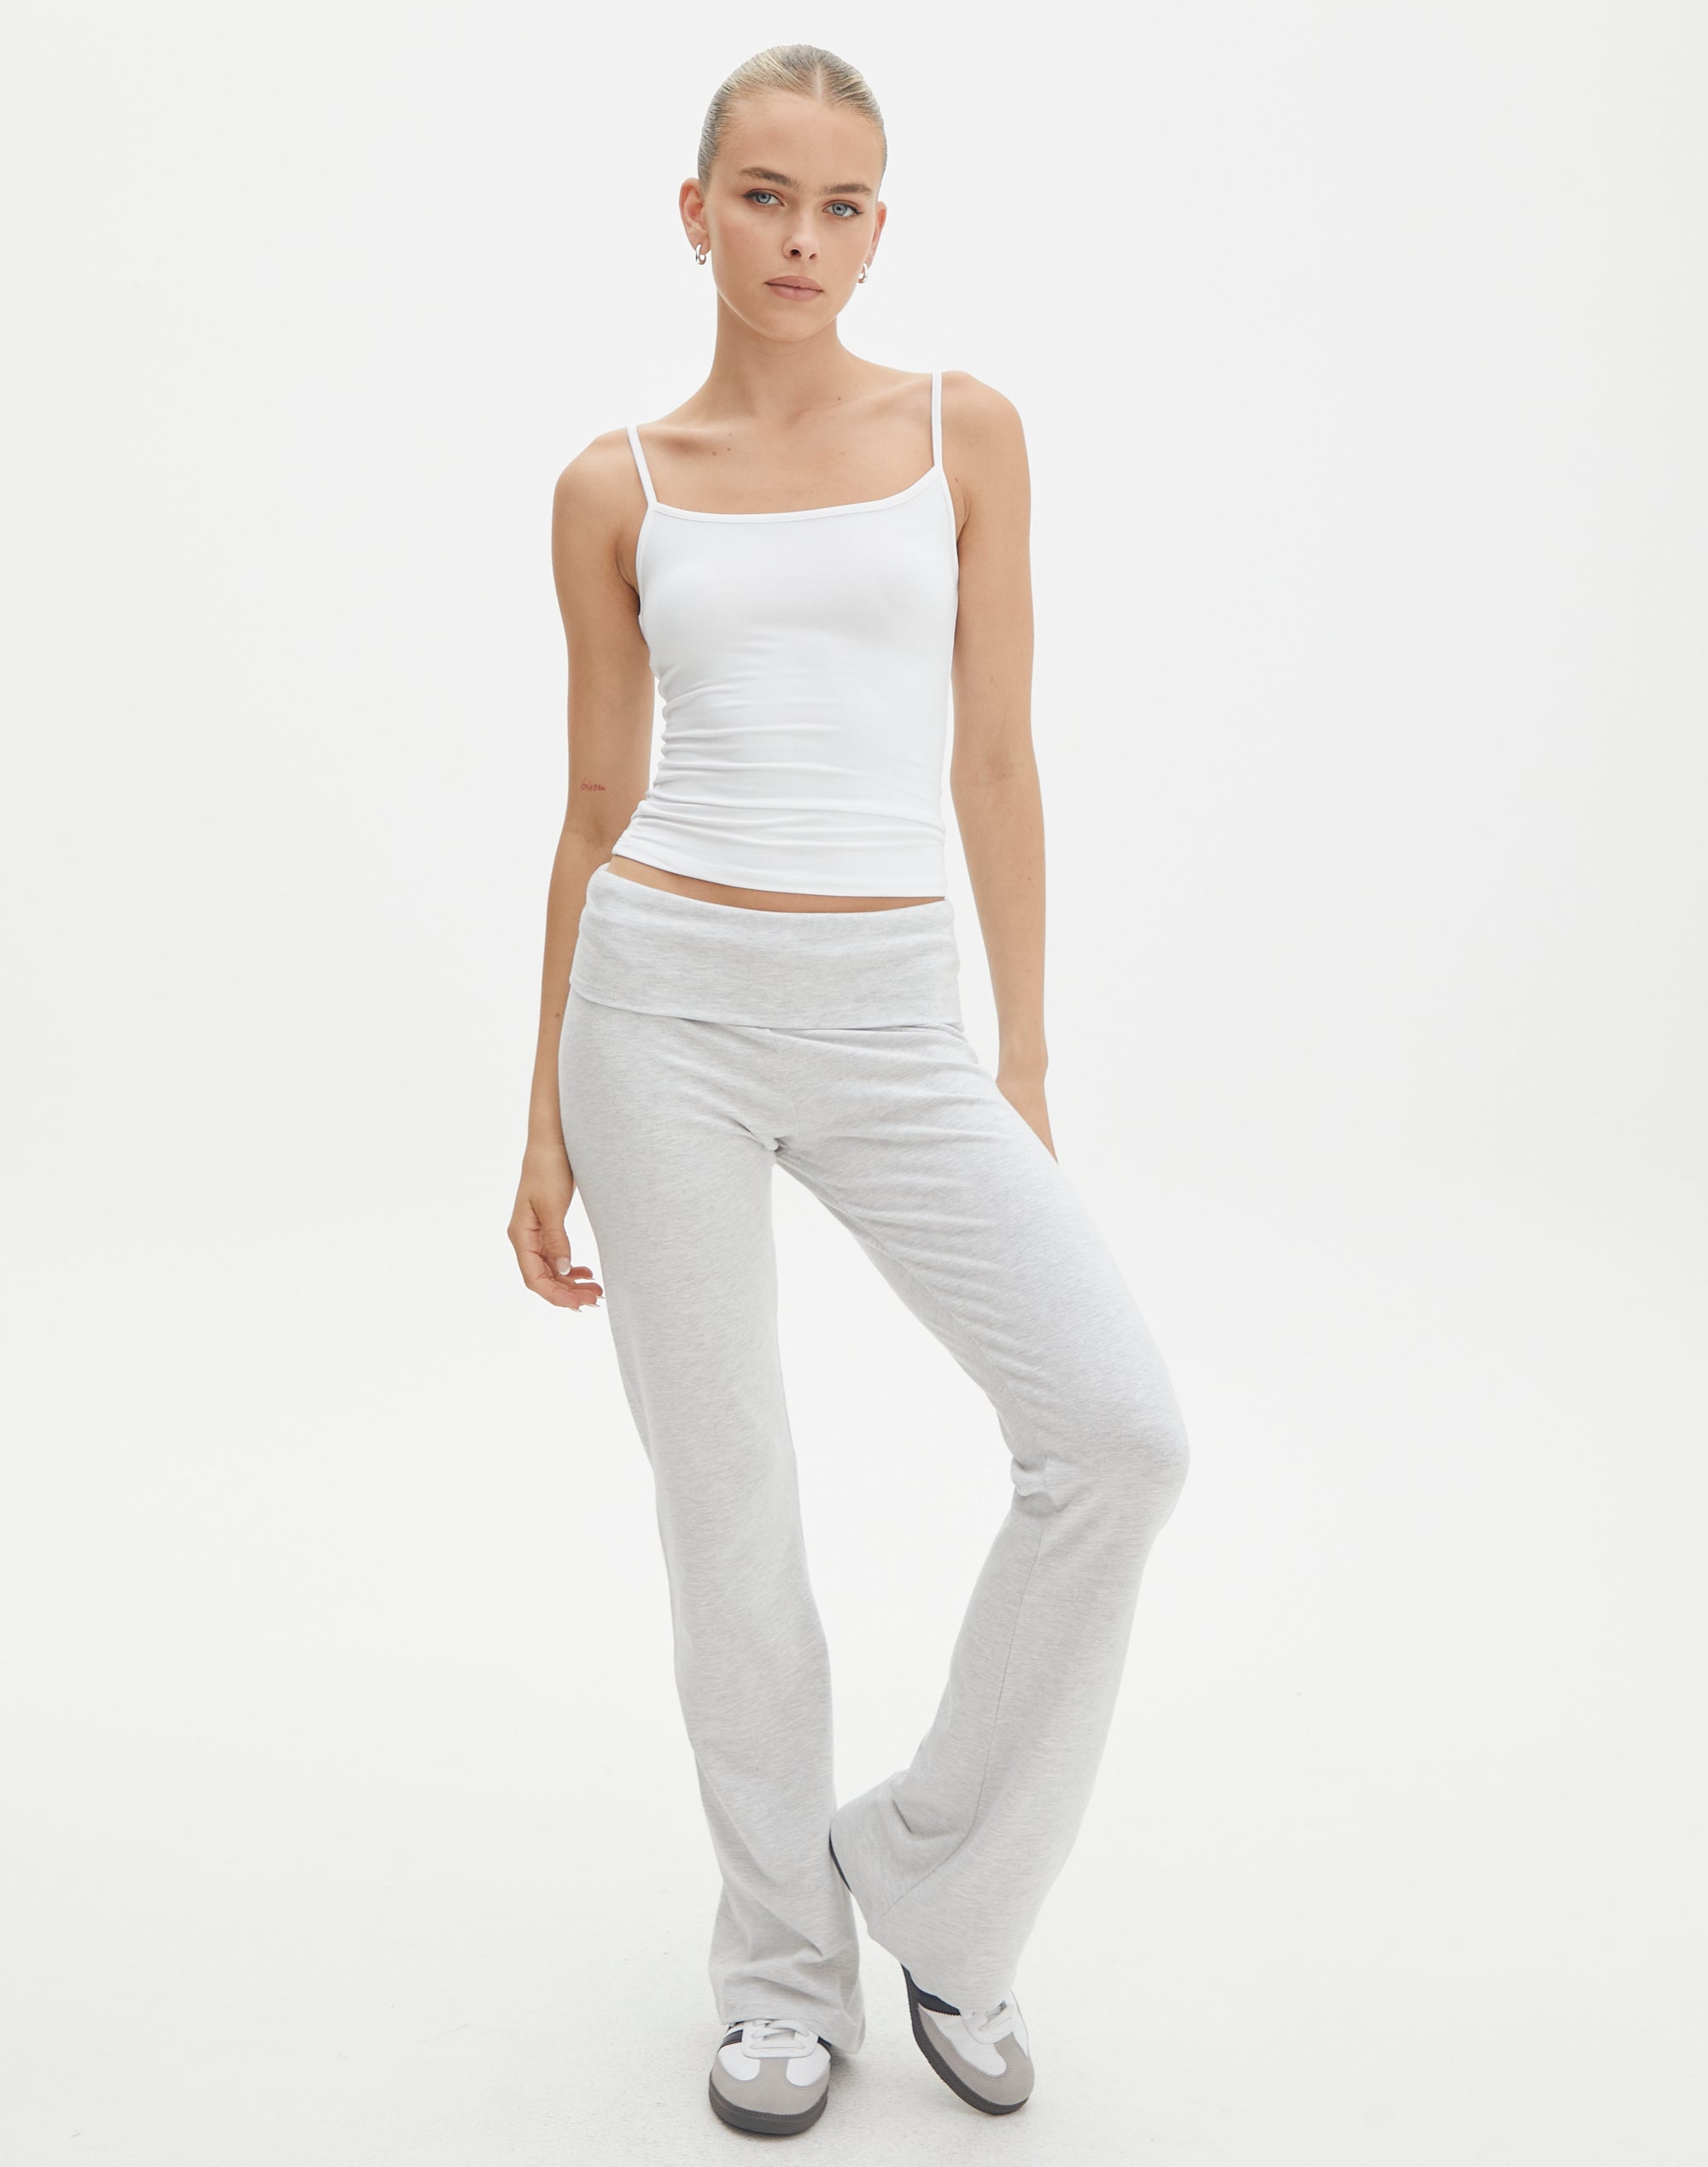 Form Fit Cotton Flare Yoga Pant in Snow Marle